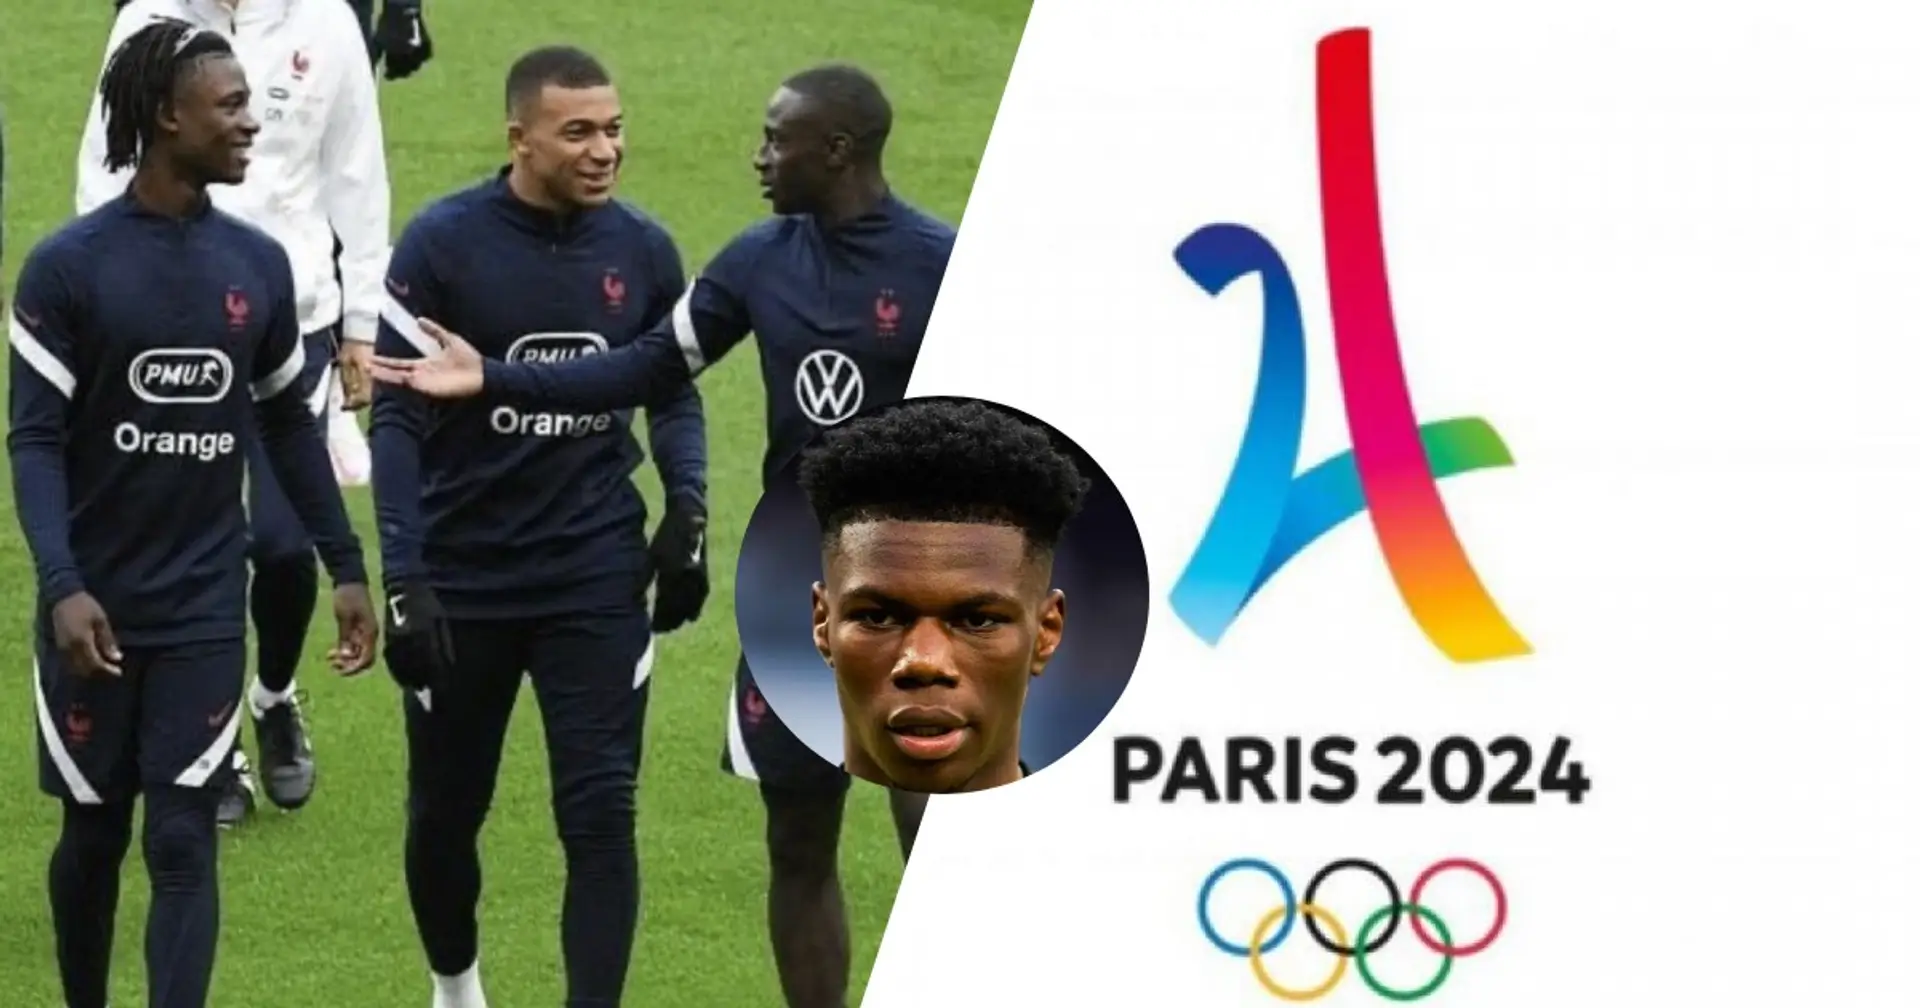 Real Madrid to stop TWO French players from Olympics in Paris  